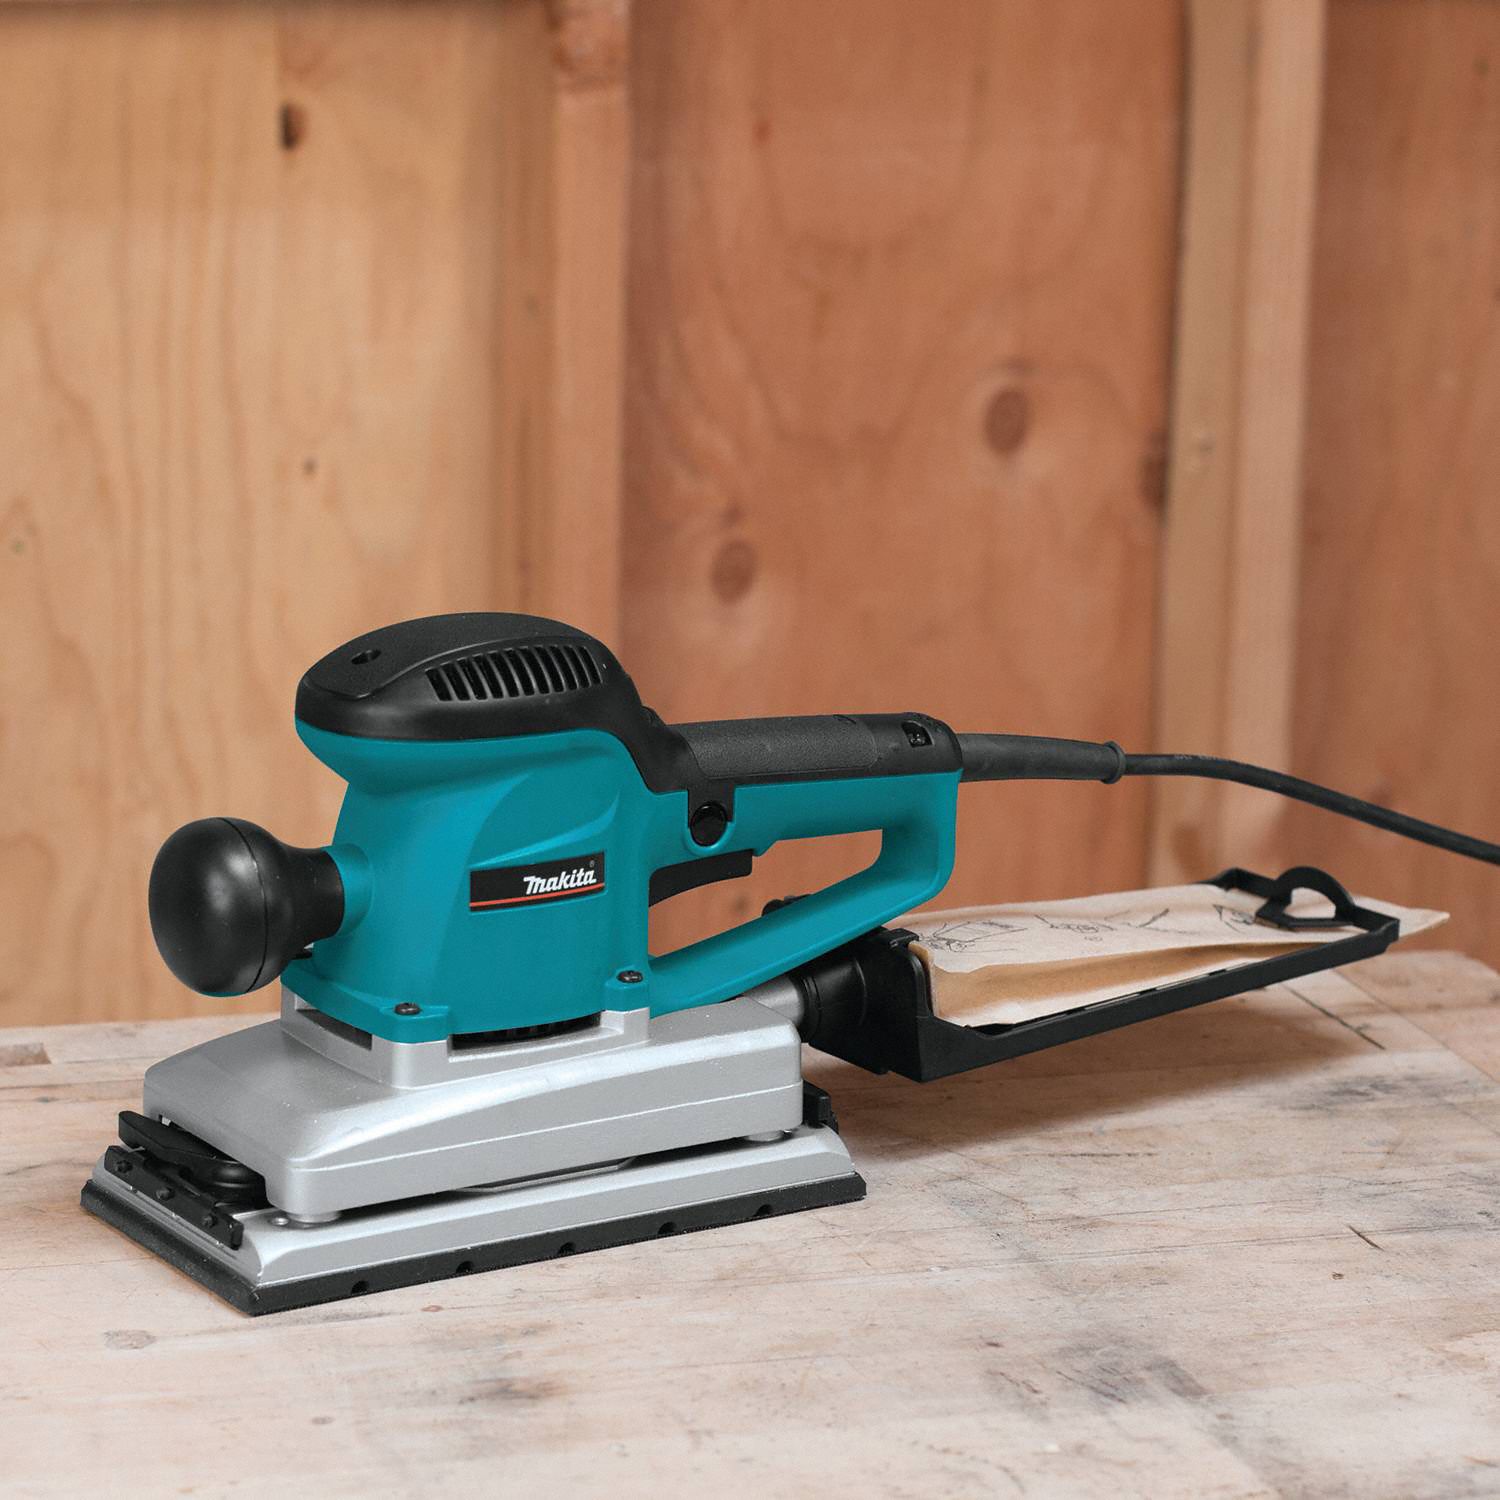 Finish Sander, Corded, 1/2 Sheet, 4 1/2 in x 9 in Pad Size, 2.9 A Amps,  Variable Speed Type